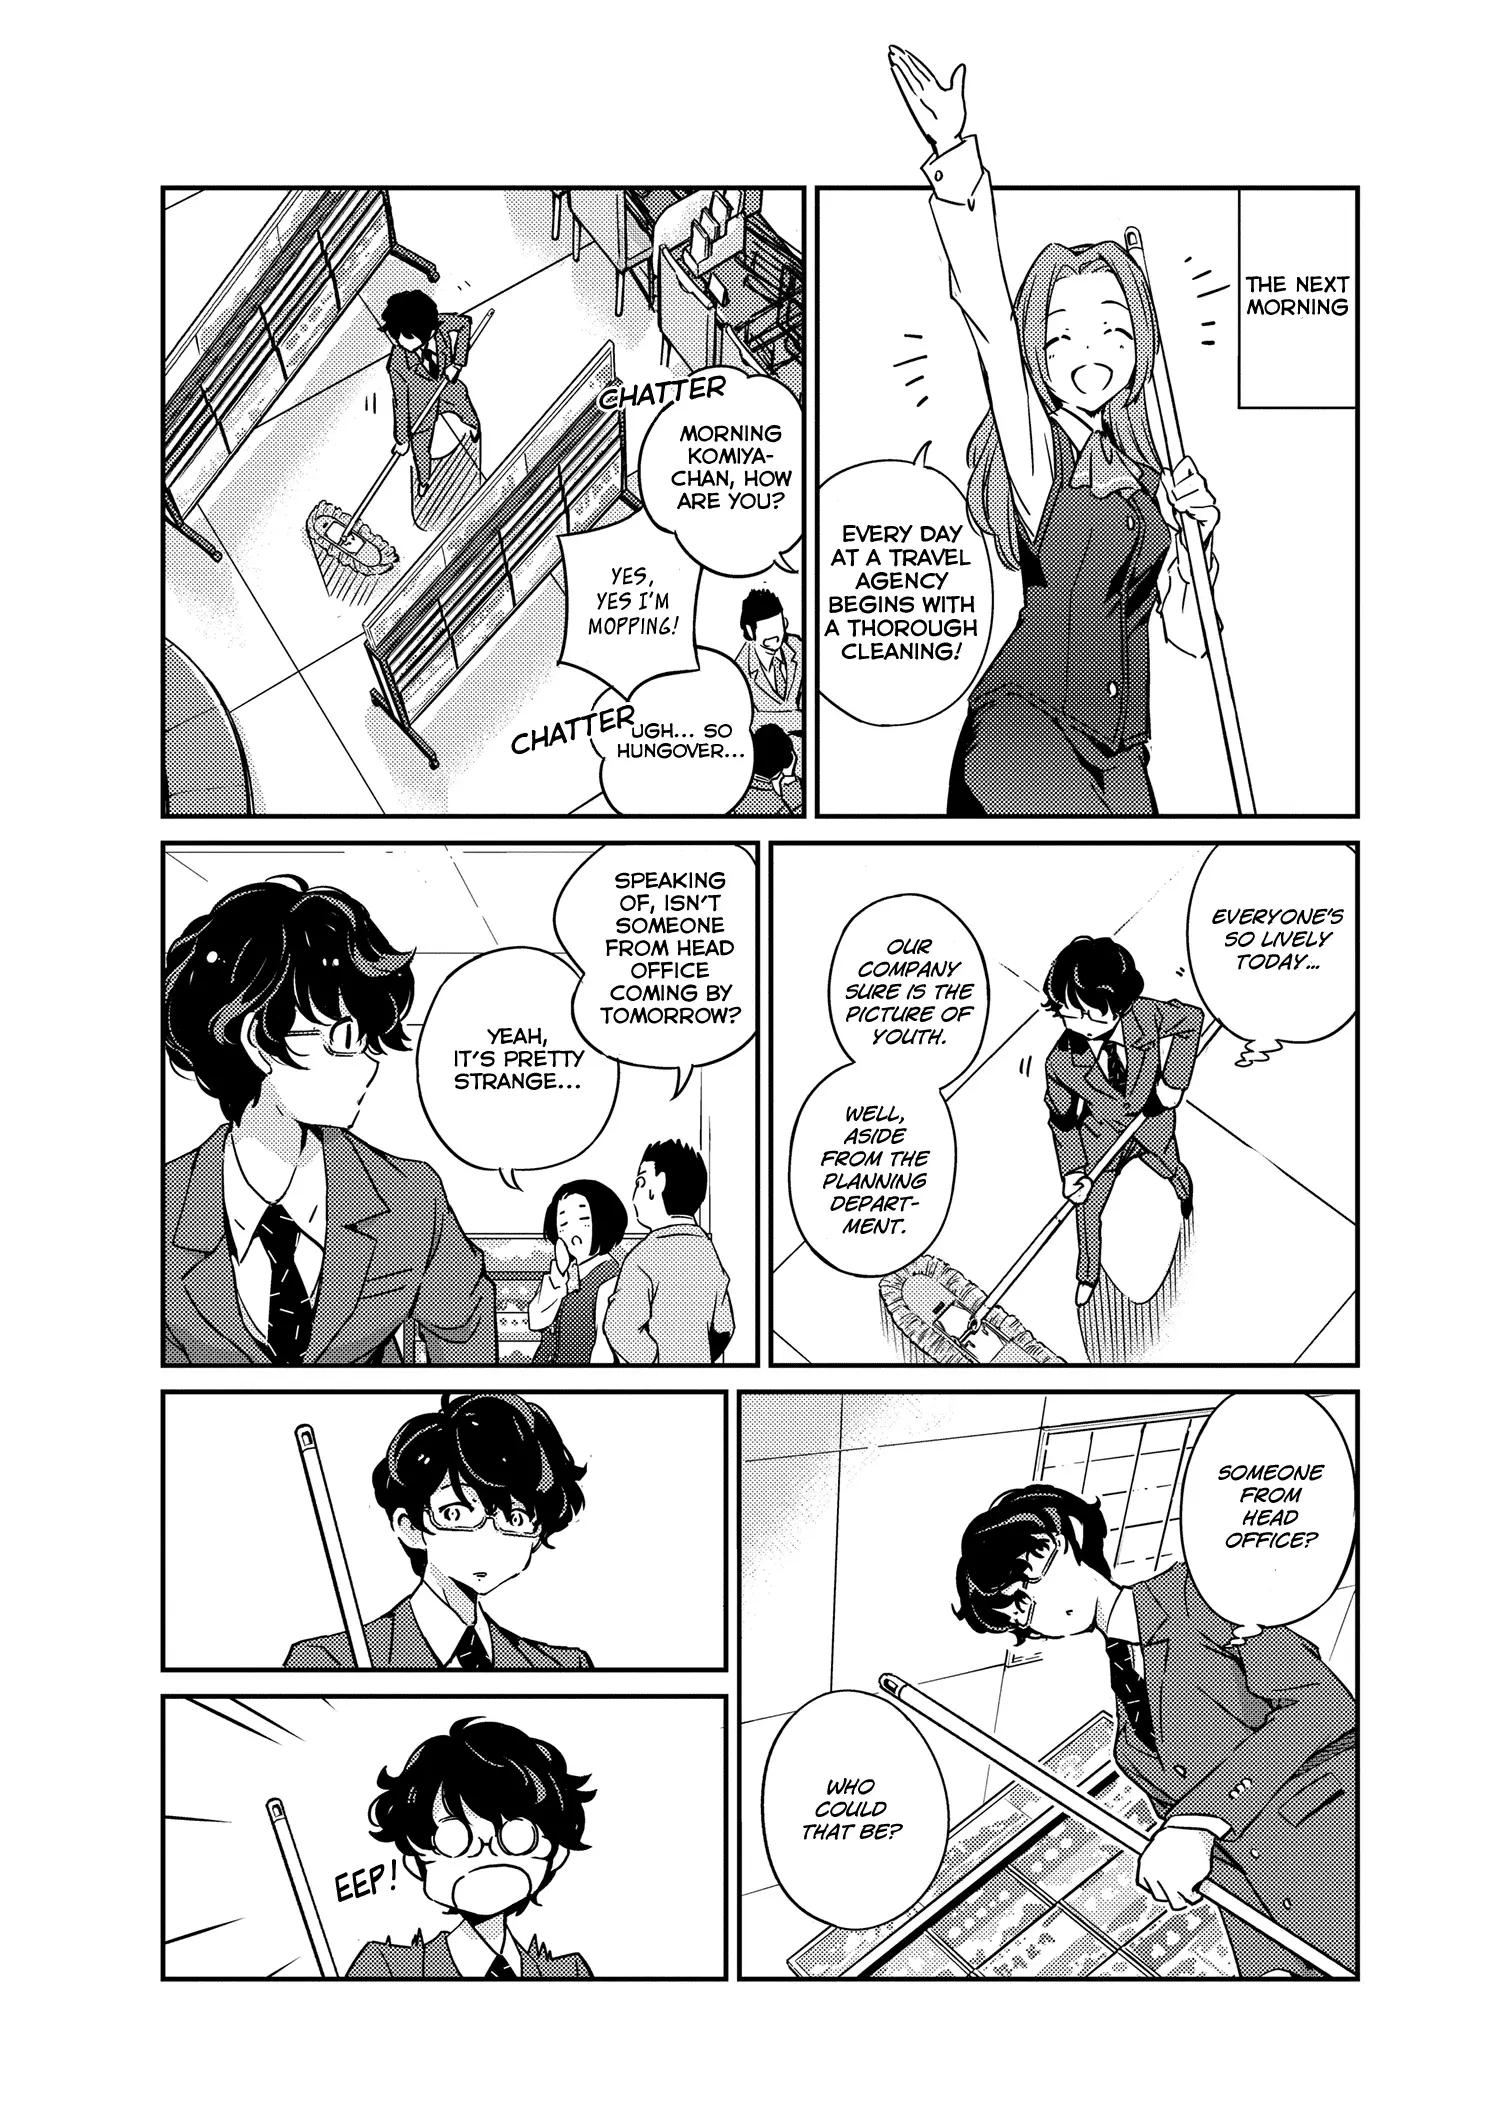 Are You Really Getting Married? - 1 page 13